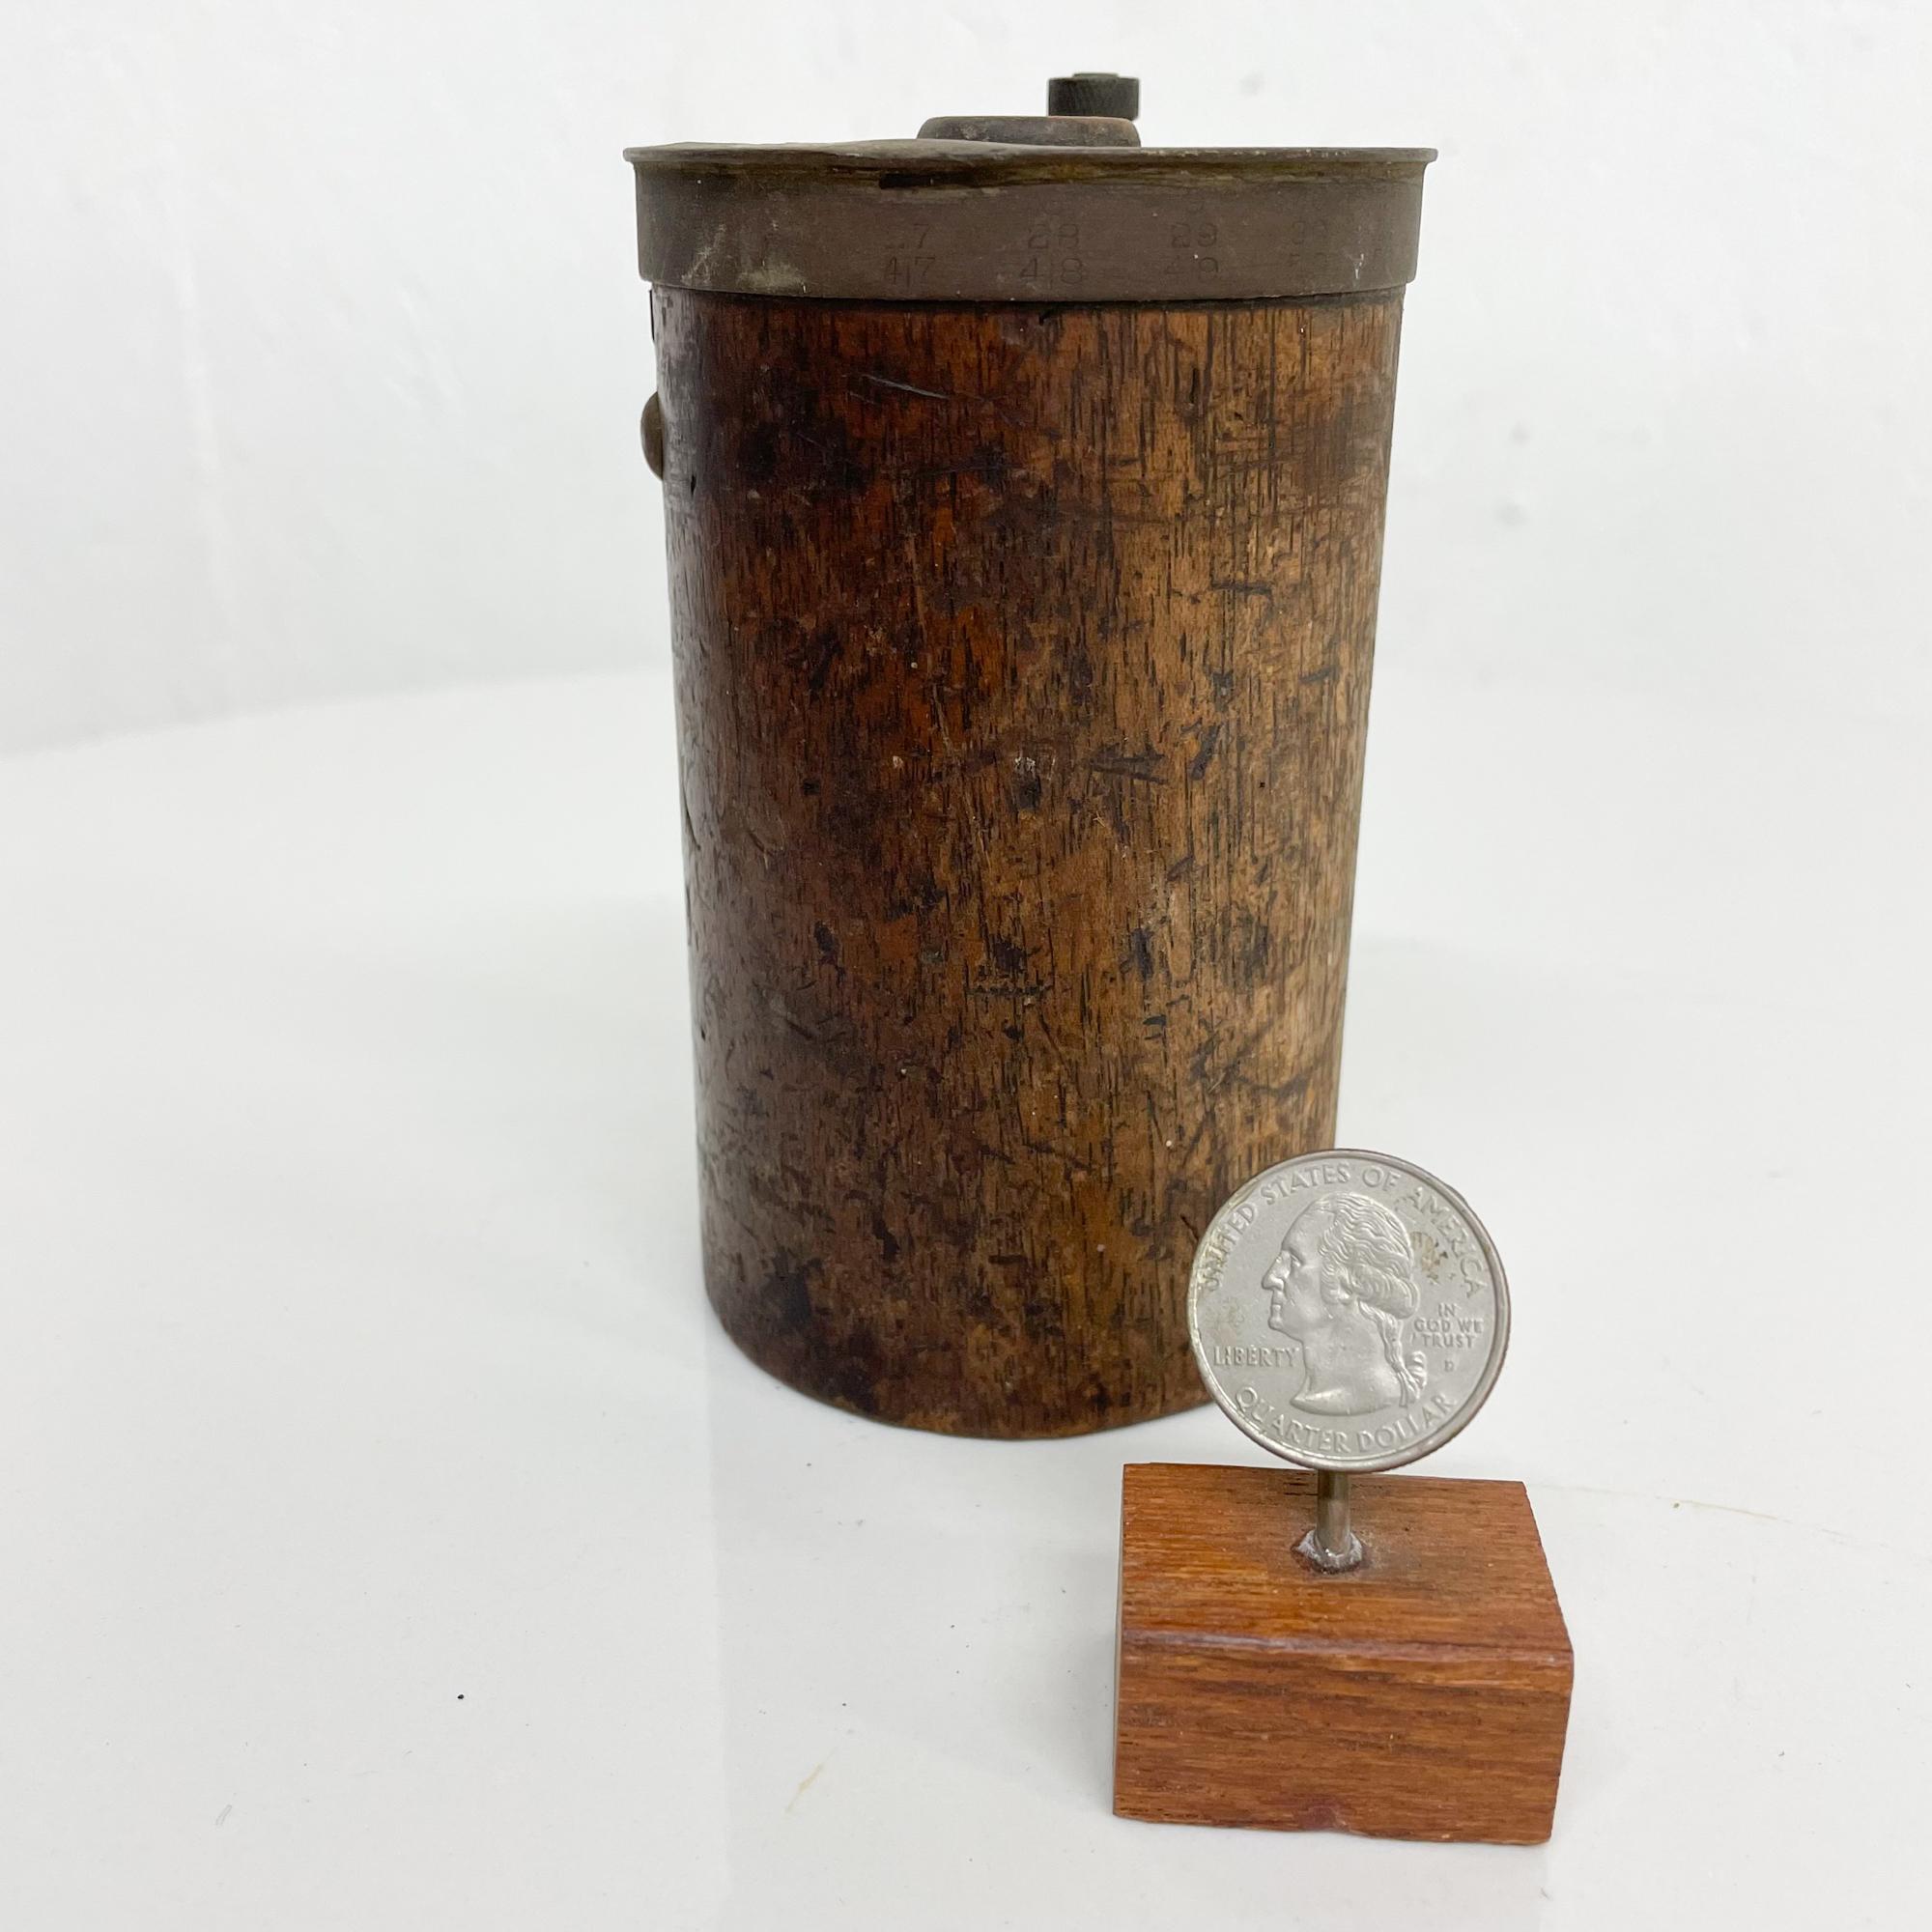 Antique wood collectible case to store drill bits. Old stock.
Made of wood has metal moving parts on top.
The upper mechanism turns for display- providing an opening to store drill bits
Size 2.88 in diameter x 5 height
Vintage patina, unrestored